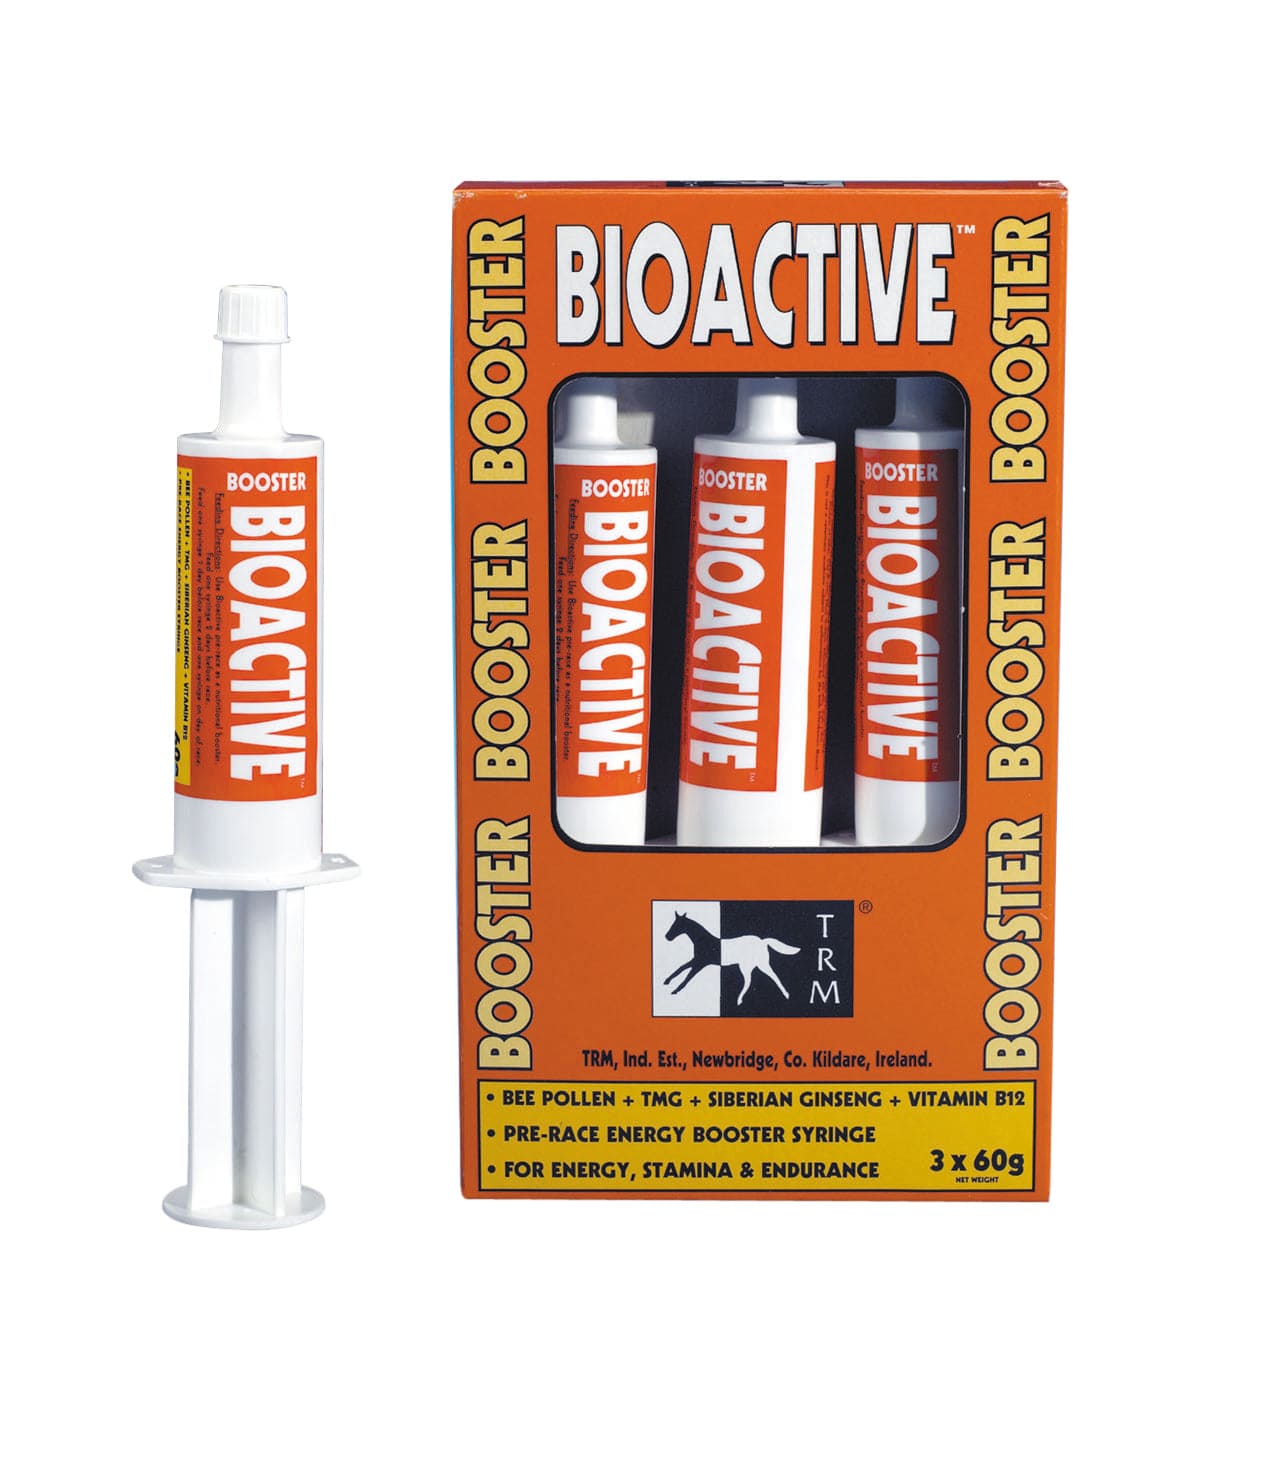 Bioactive booster